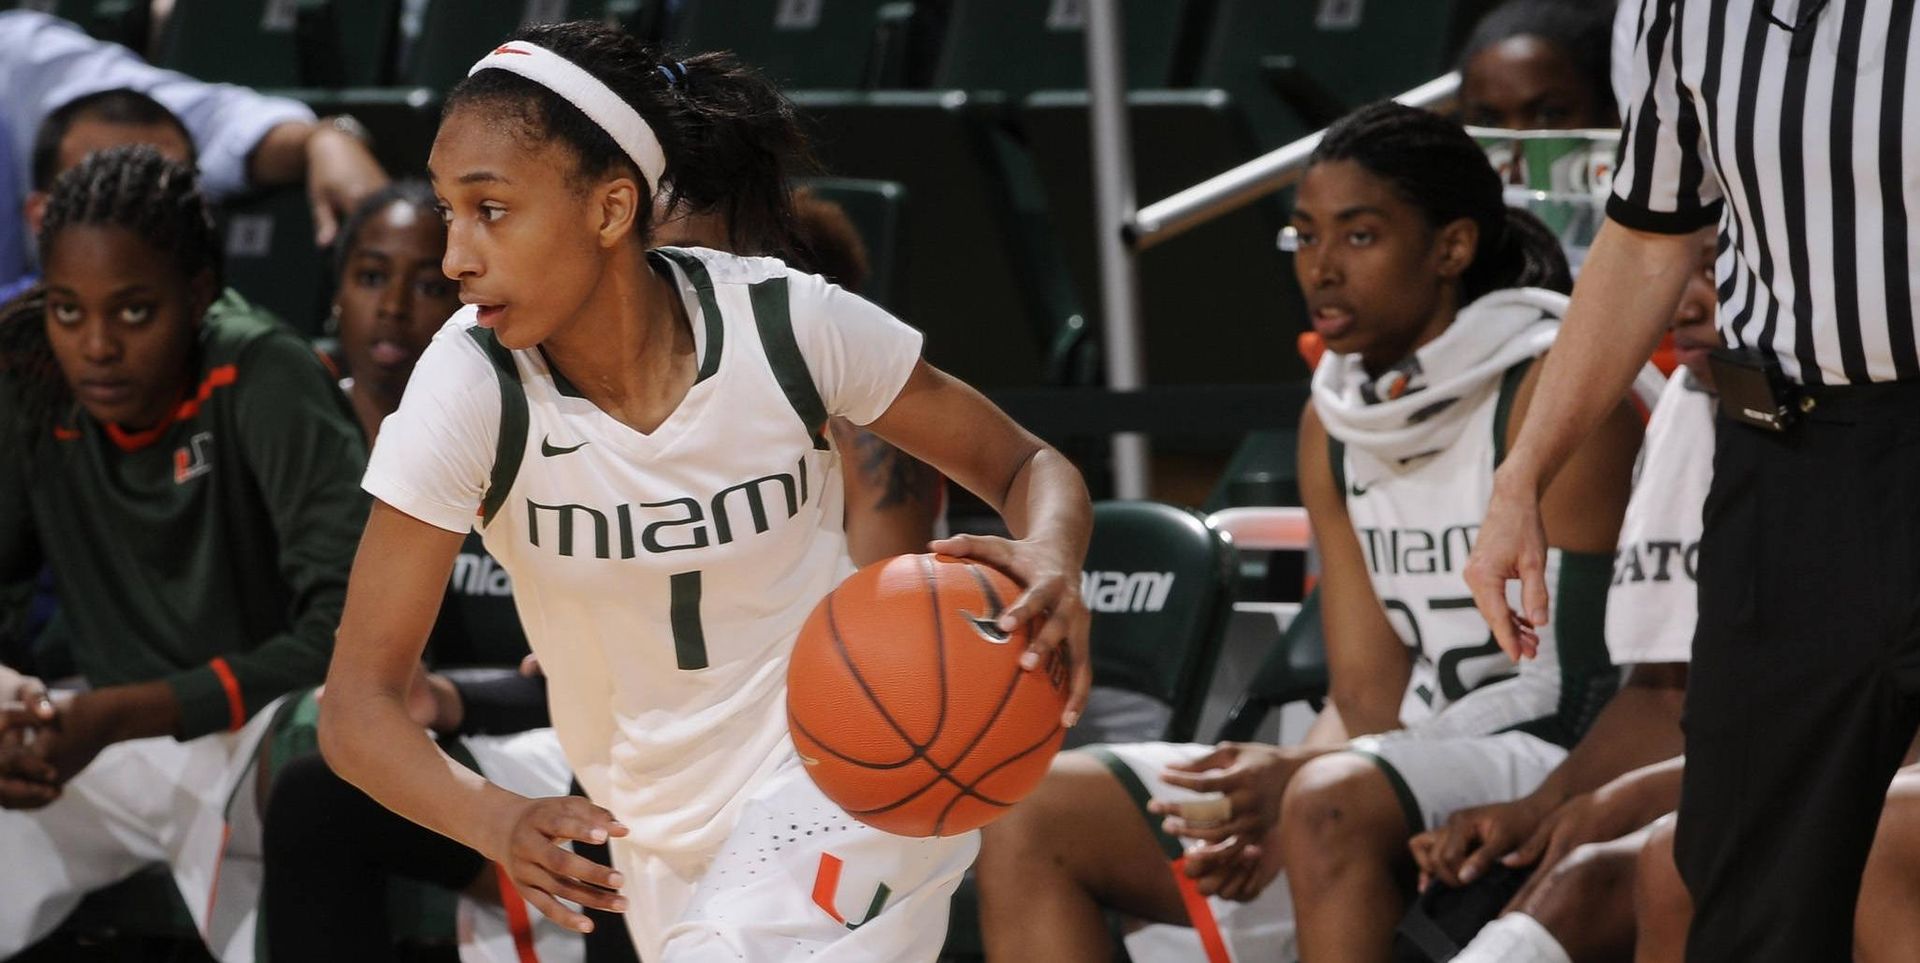 @MiamiWBB Game Day: Where to Watch and Listen